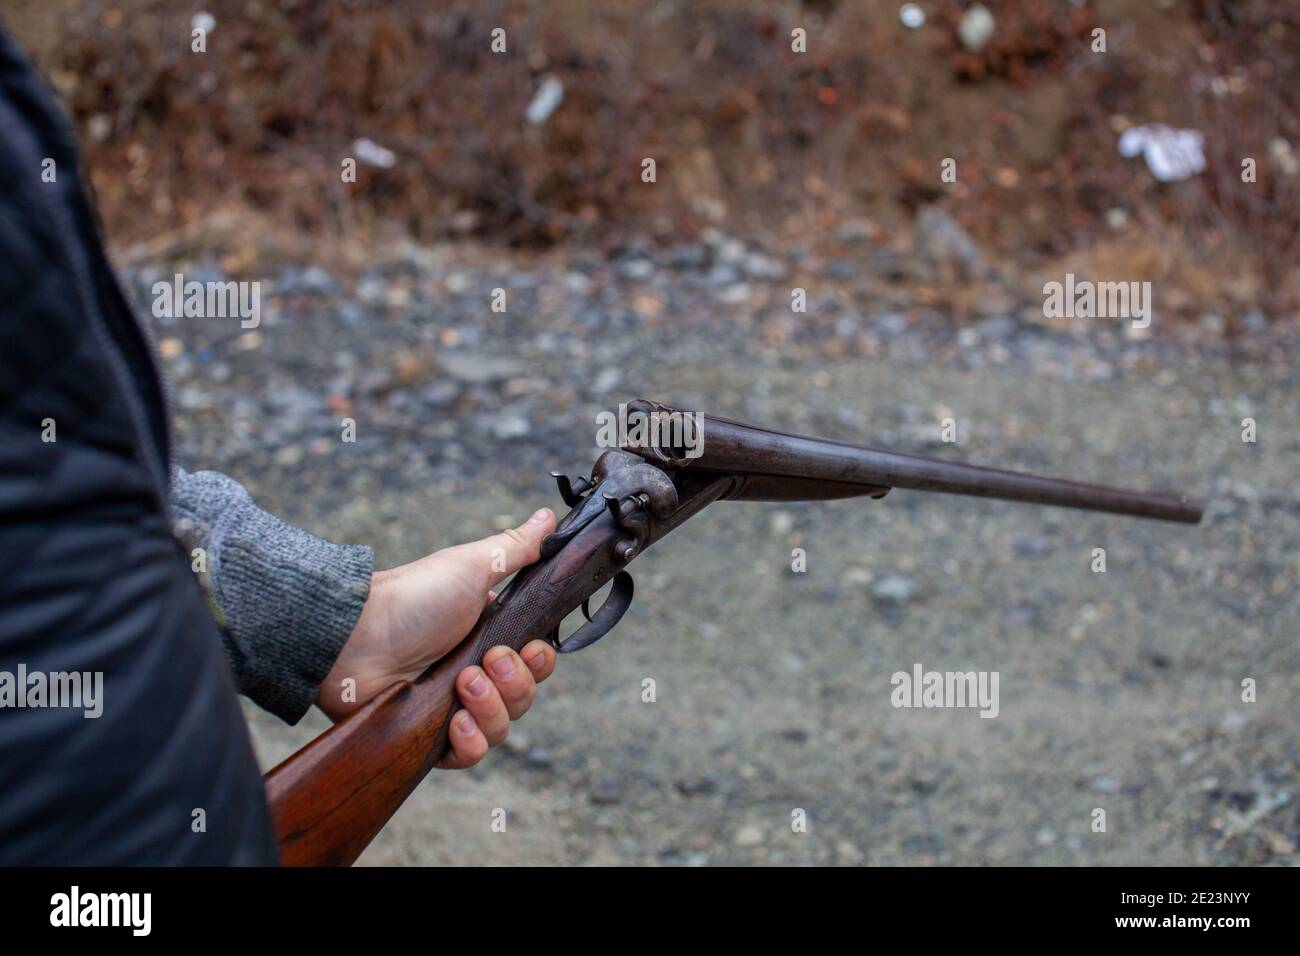 A man holds an old, antique, double-barrel break action shotgun out, ready to load two rounds into the bore. Outdoor range in Squamish, British-Columb Stock Photo